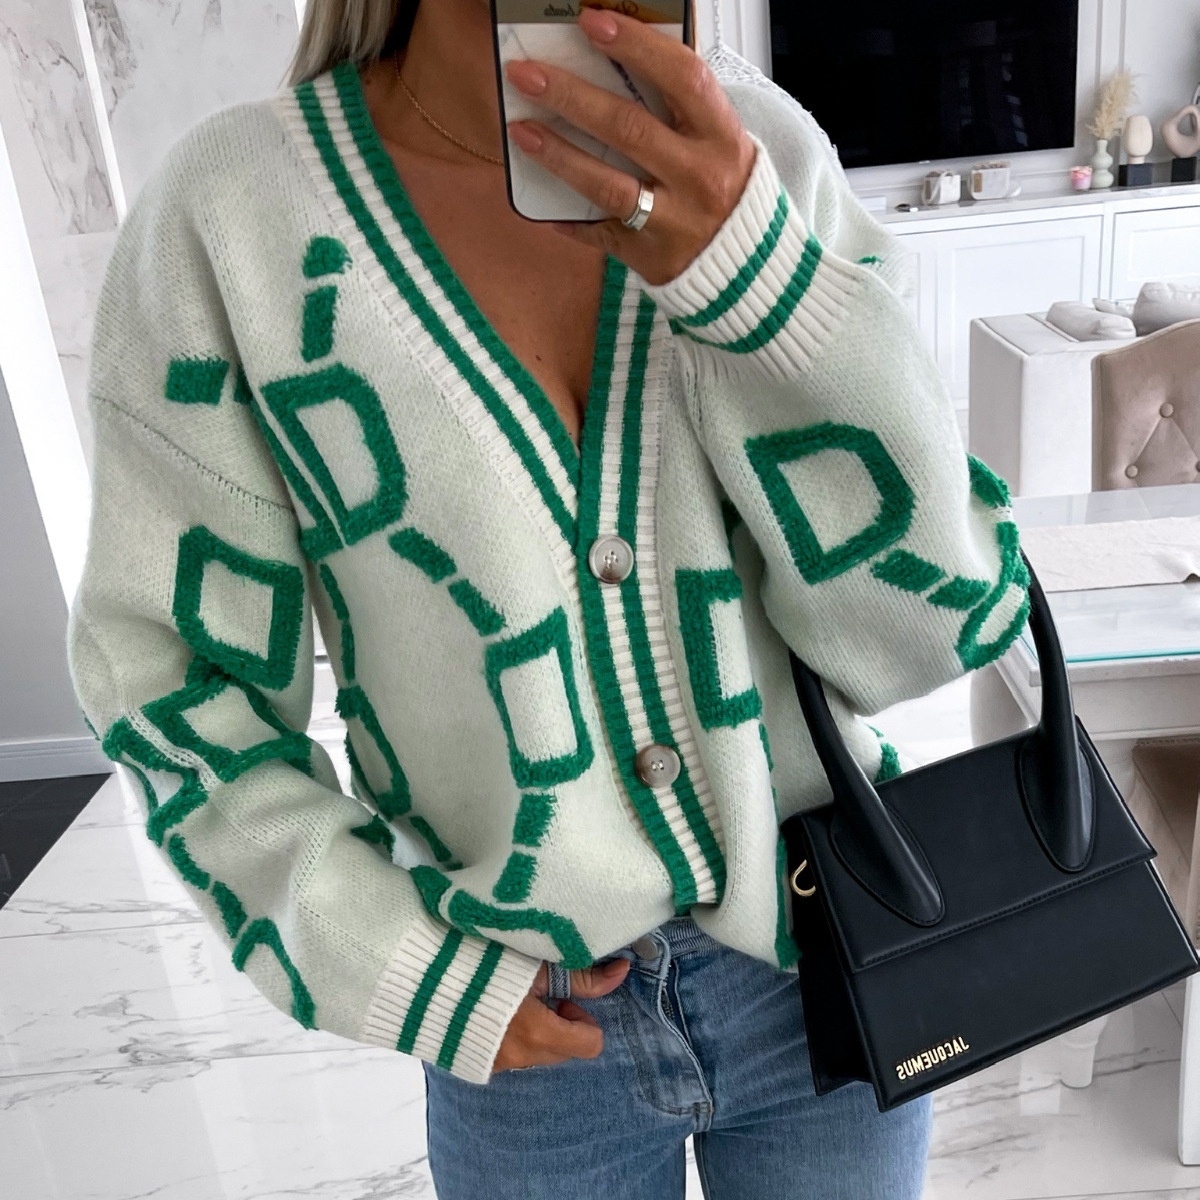 High Contrast Knit Cardigan, V-Neck Button Up Cardigan Sweater, Casual Tops For Fall & Winter, Women's Clothing - White, S